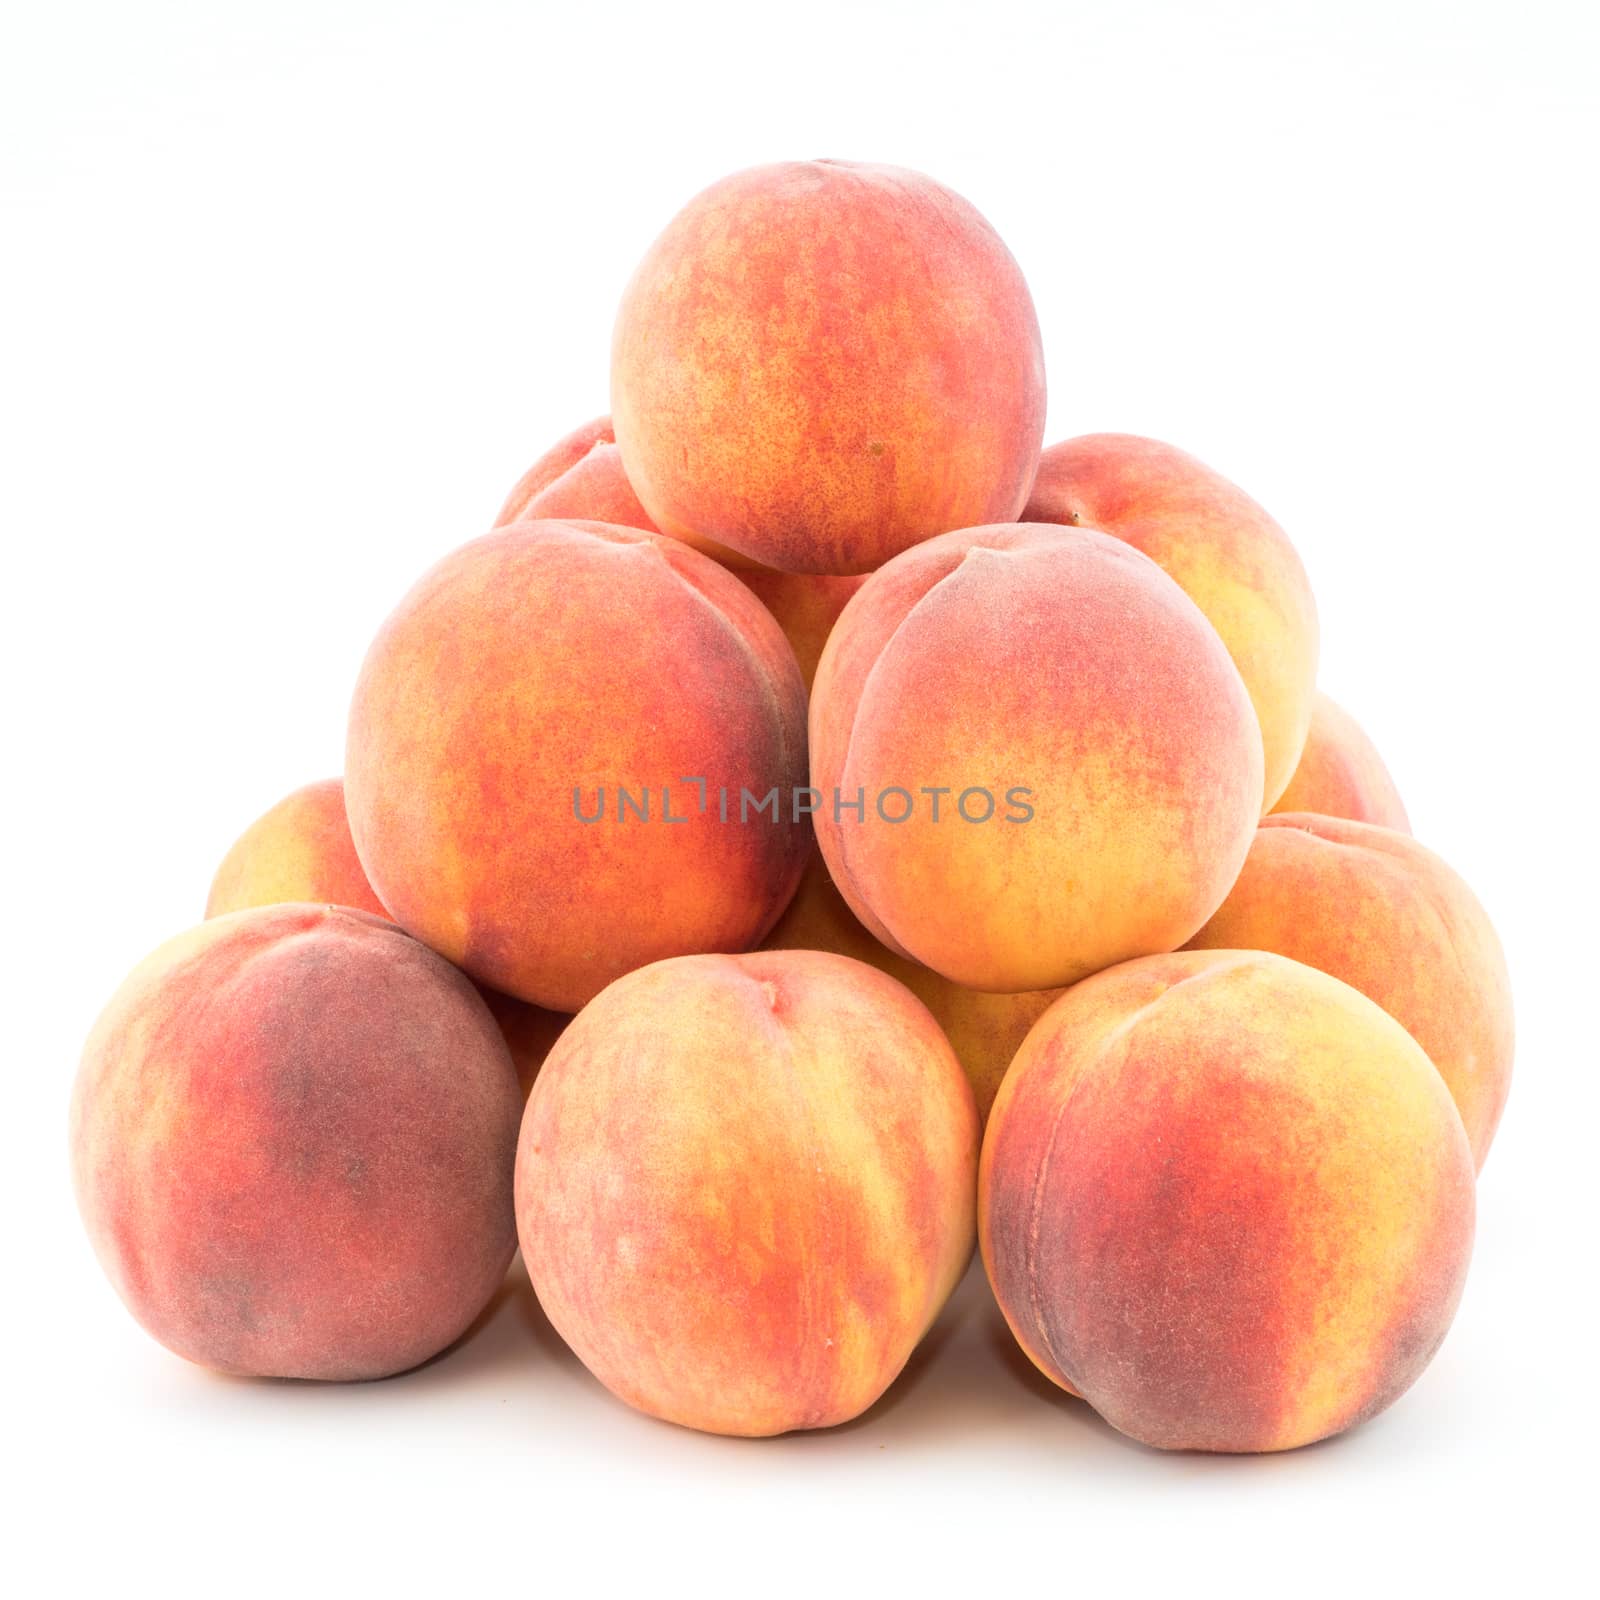 Ripe peach fruit isolated on white background cutout. Selective focus.